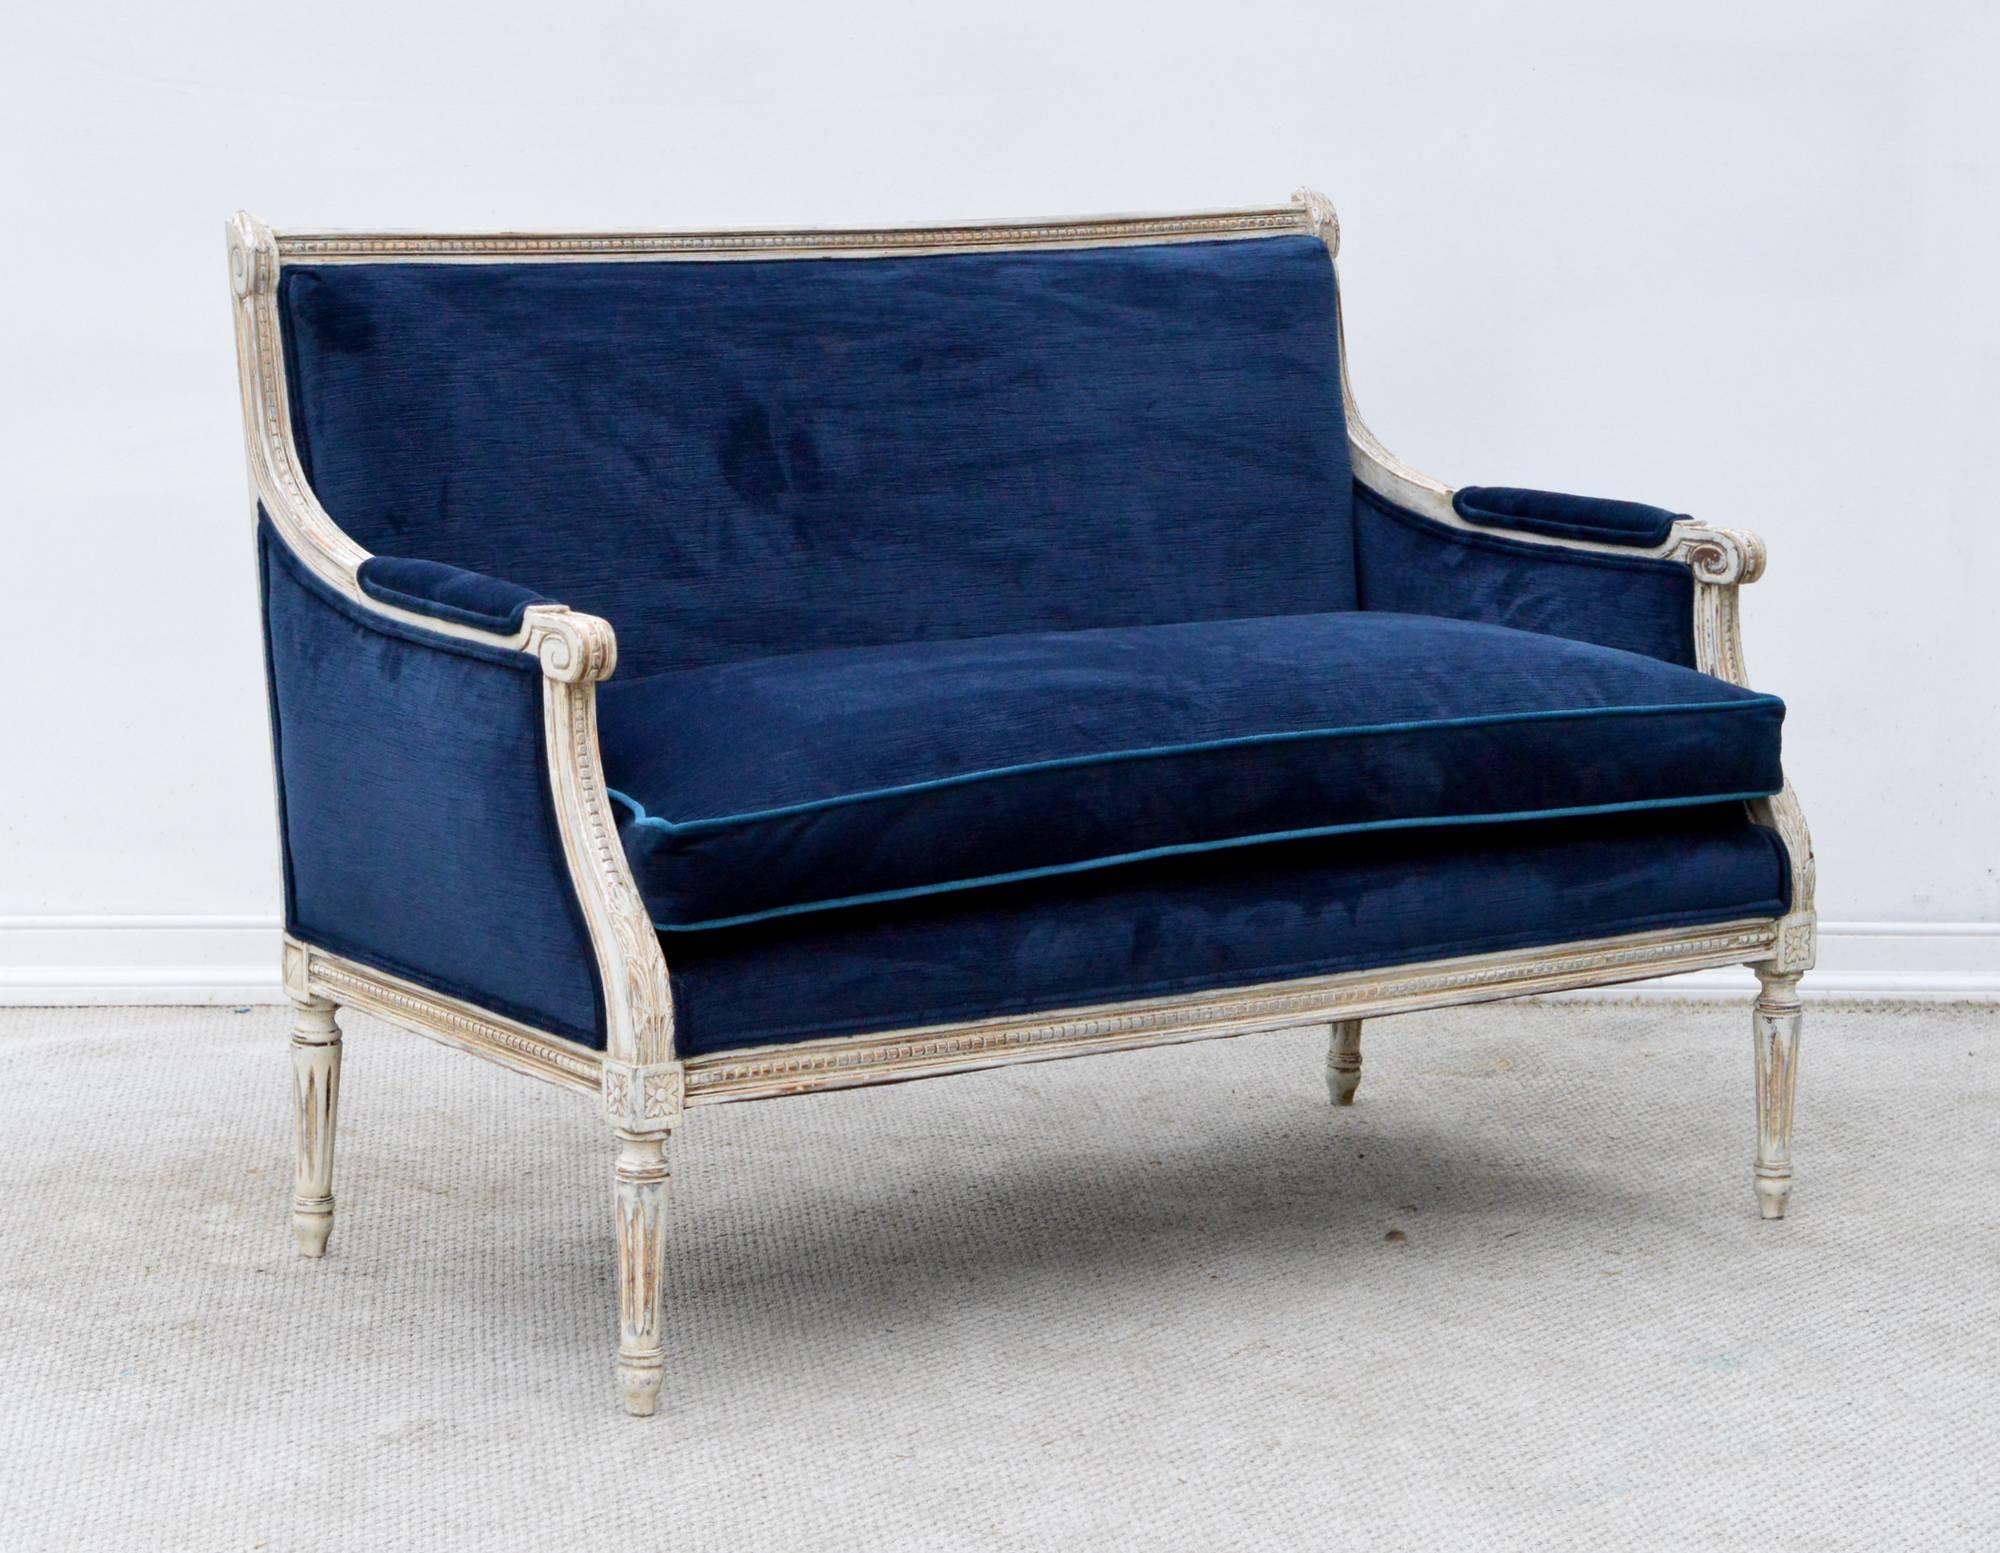 A stunning French Louis XVI style settee in navy velvet. The custom finished grey frame supports a plush and reconditioned single long down cushion. Cushion is outfitted with a subtle contrasting pipping in peacock velvet. The look is chic and